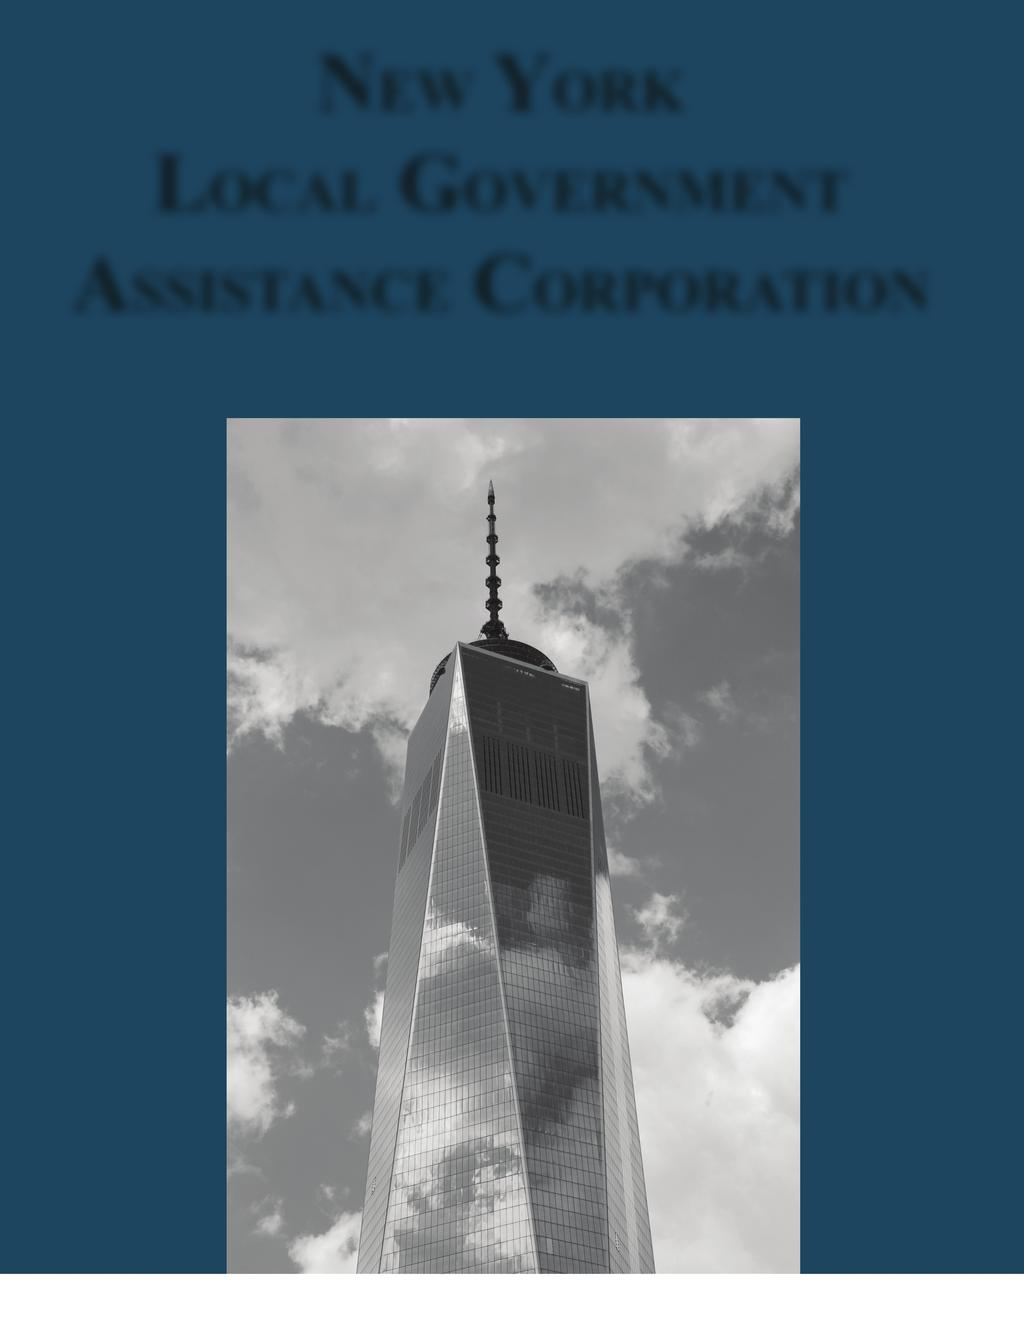 NEW YORK LOCALGOVERNMENT ASSISTANCECORPORATION I n v e s t me n